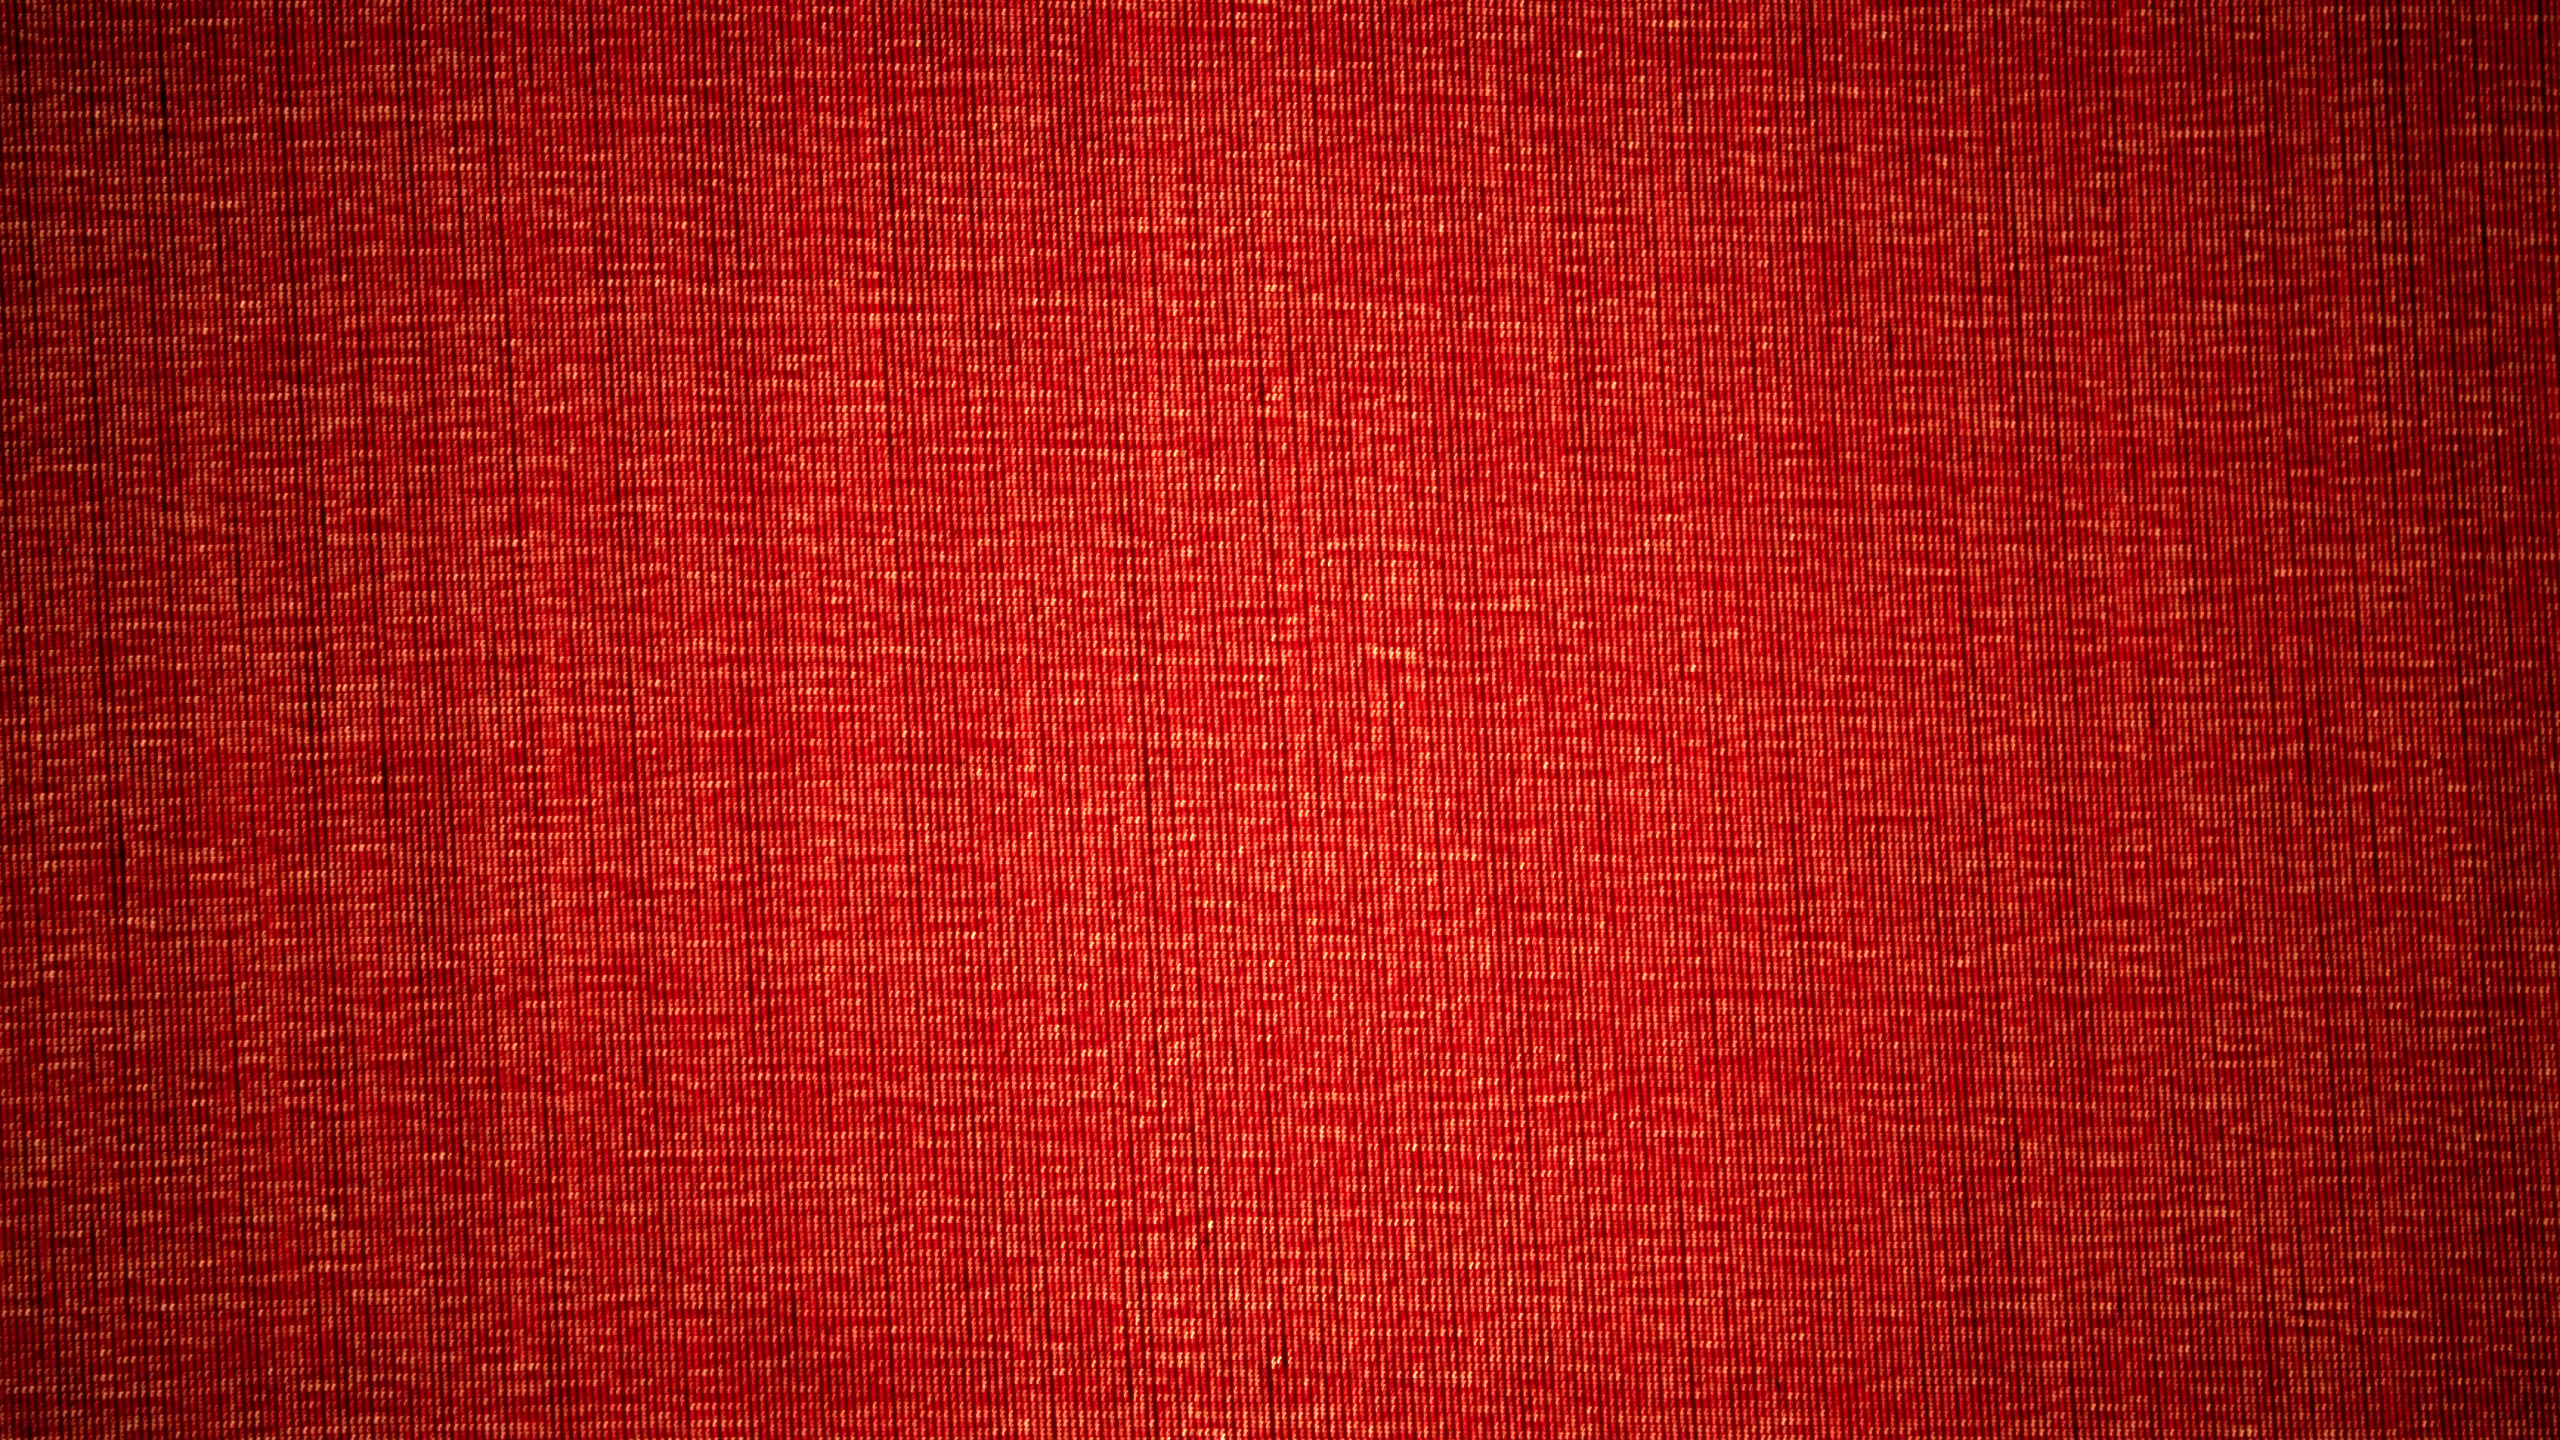 Rotes Textil in Nahaufnahme. Wallpaper in 2560x1440 Resolution